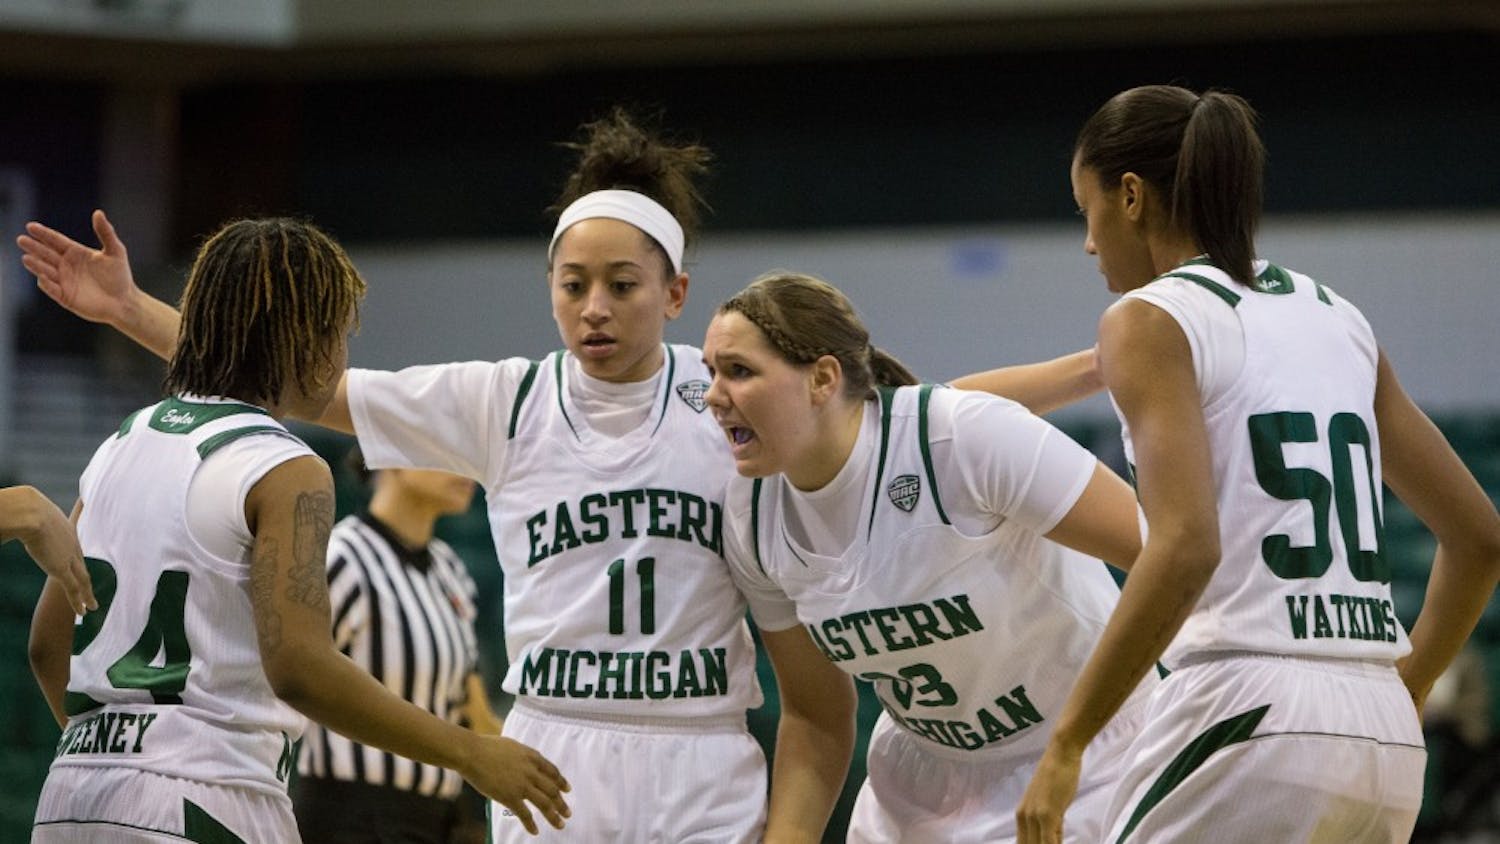 EMU forward Olivia Fouty (33) rallies the team in the first half of Eastern Michigan's 83-77 win over Western Michigan Wednesday night.